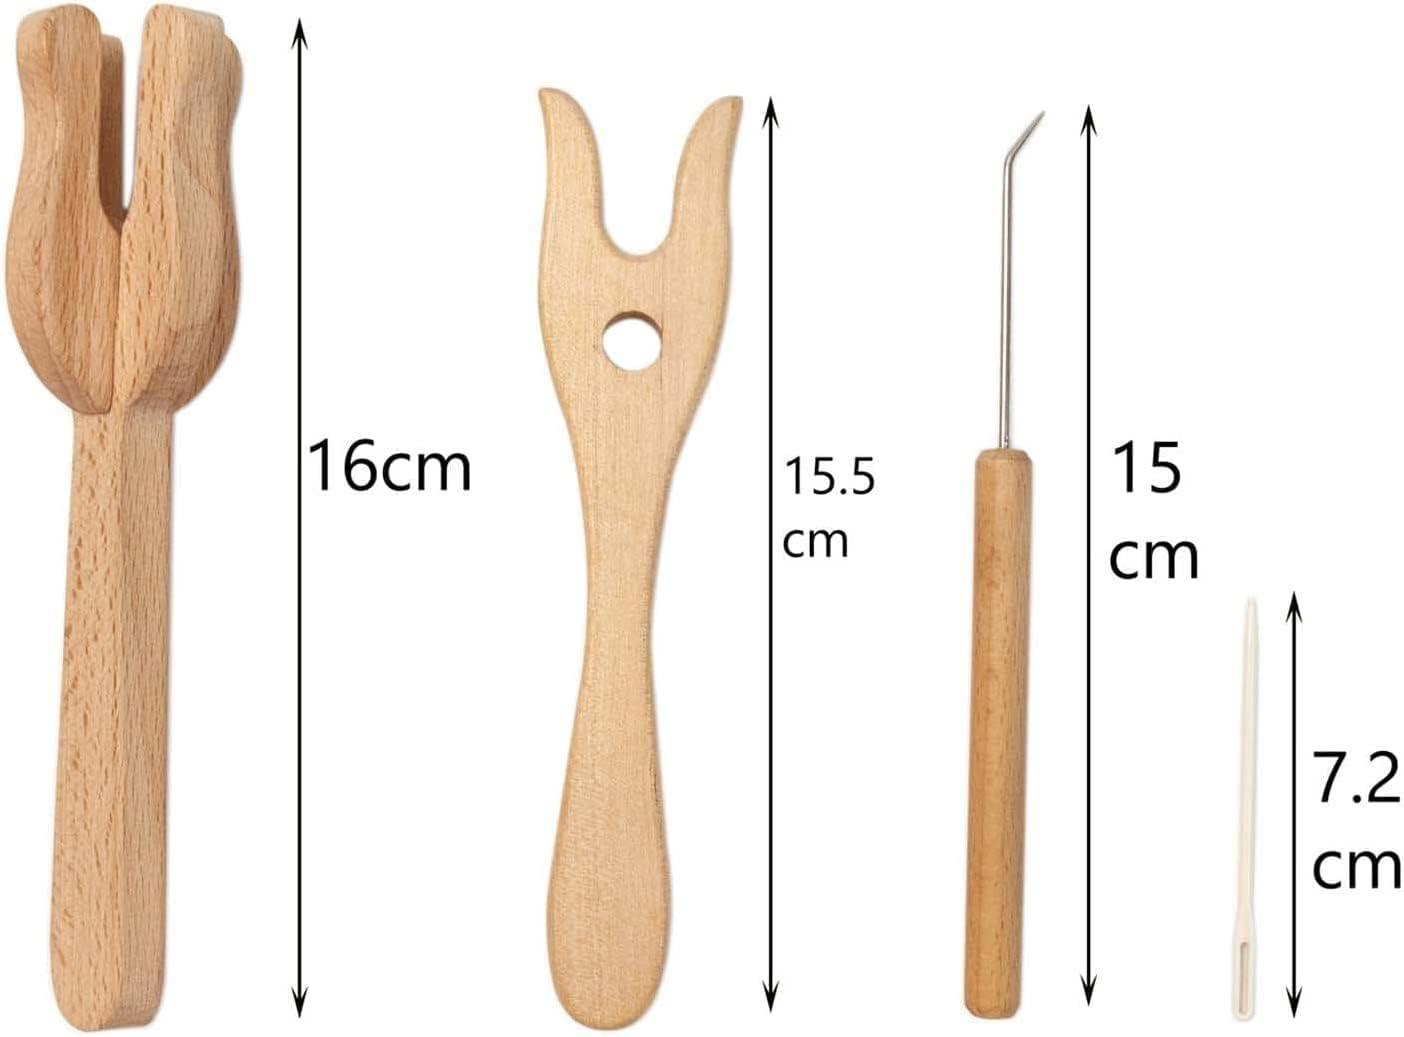 Knitting Fork and Needle Kit, Durable Lucet Fork Cordmaking Braid